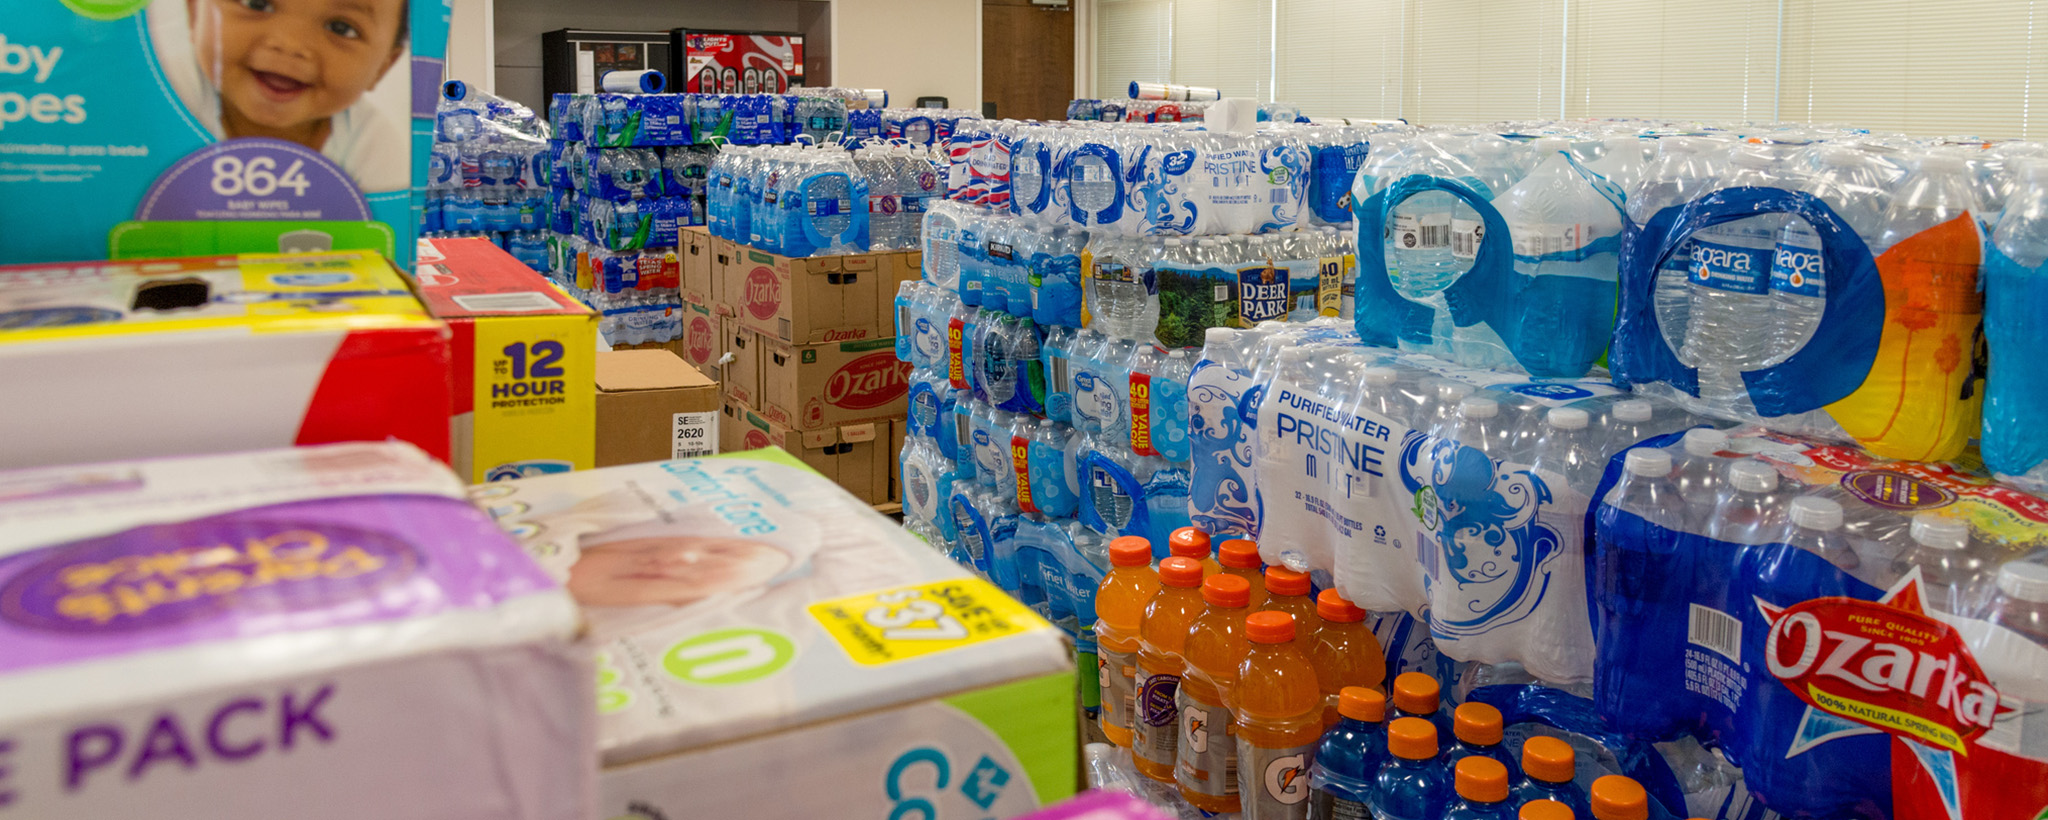 A  donation center filled with Gatorade, water, and diapers